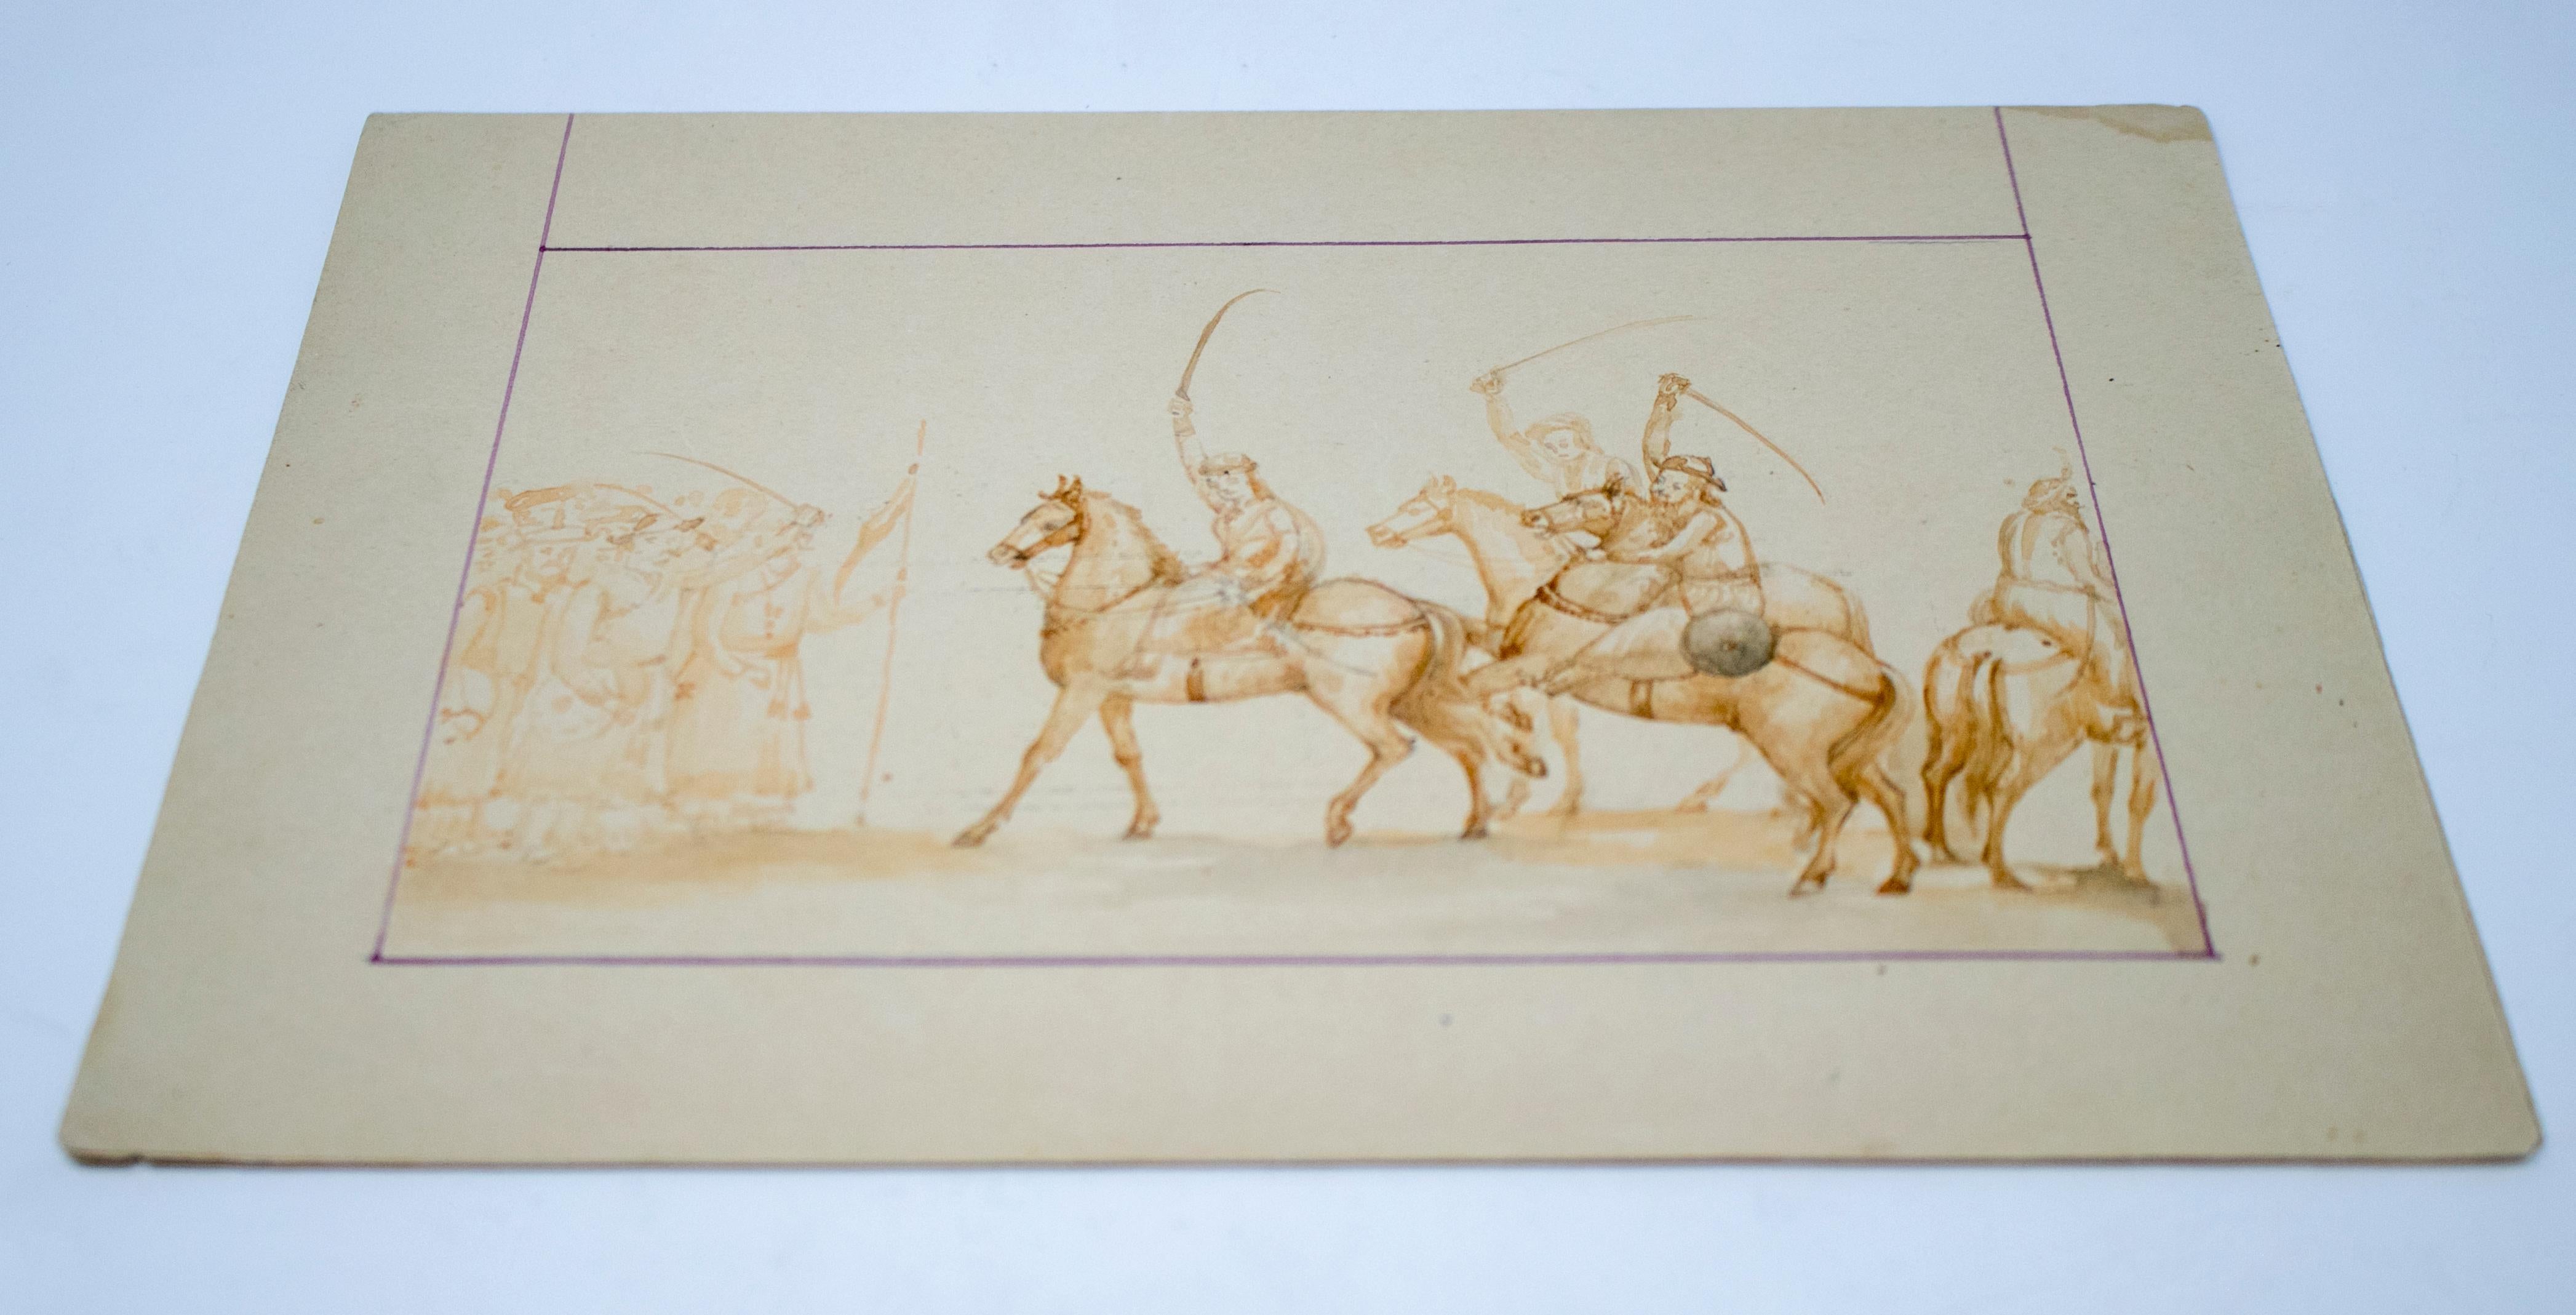 1970s Indian Mughal gouache paper drawing depicting military horsemen. 

Part of a larger private collection.   
     